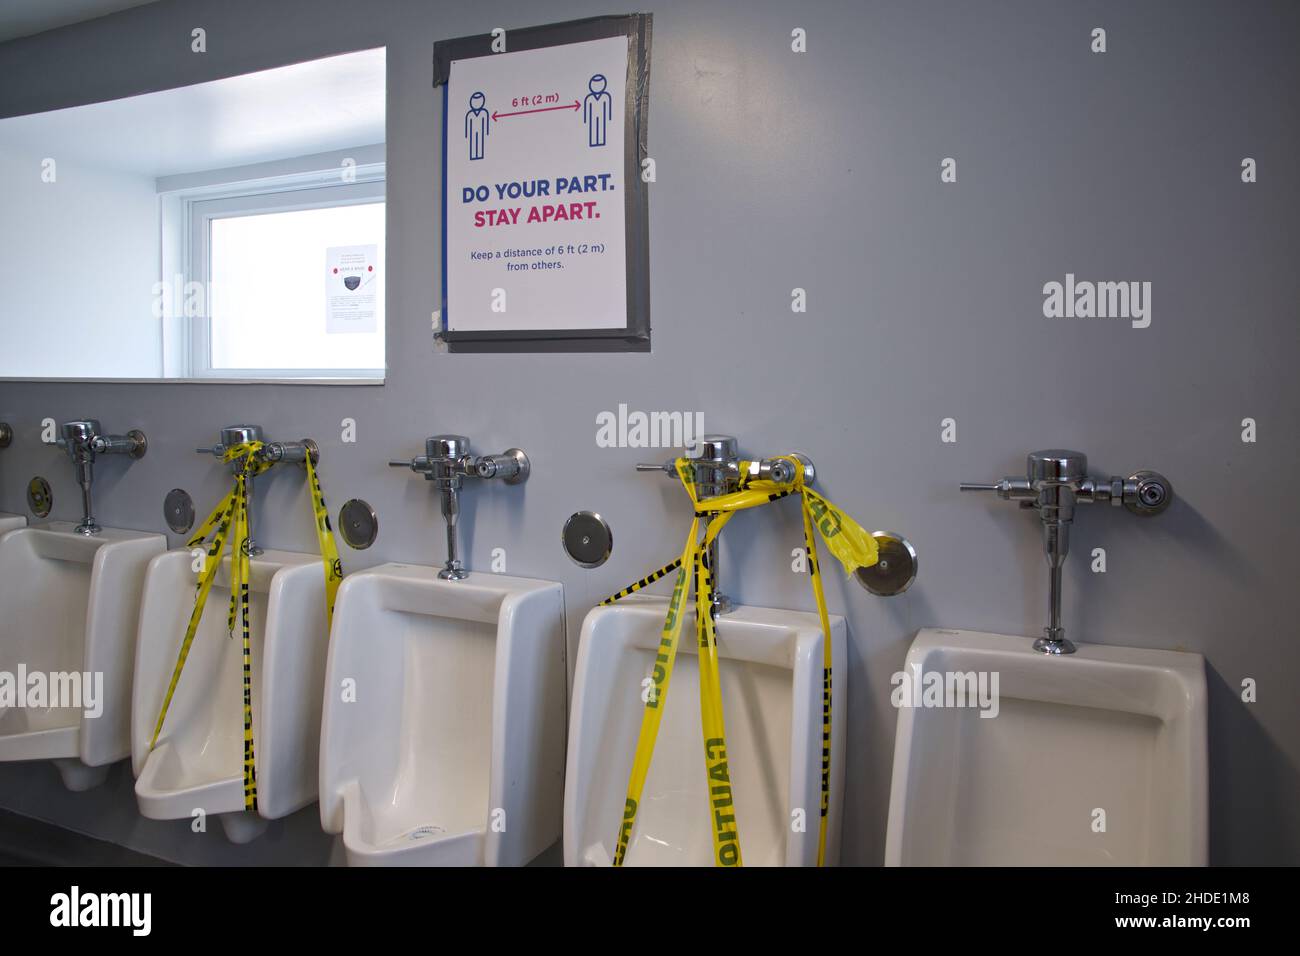 A poster of social distancing was put up inside the public restroom in the park Stock Photo